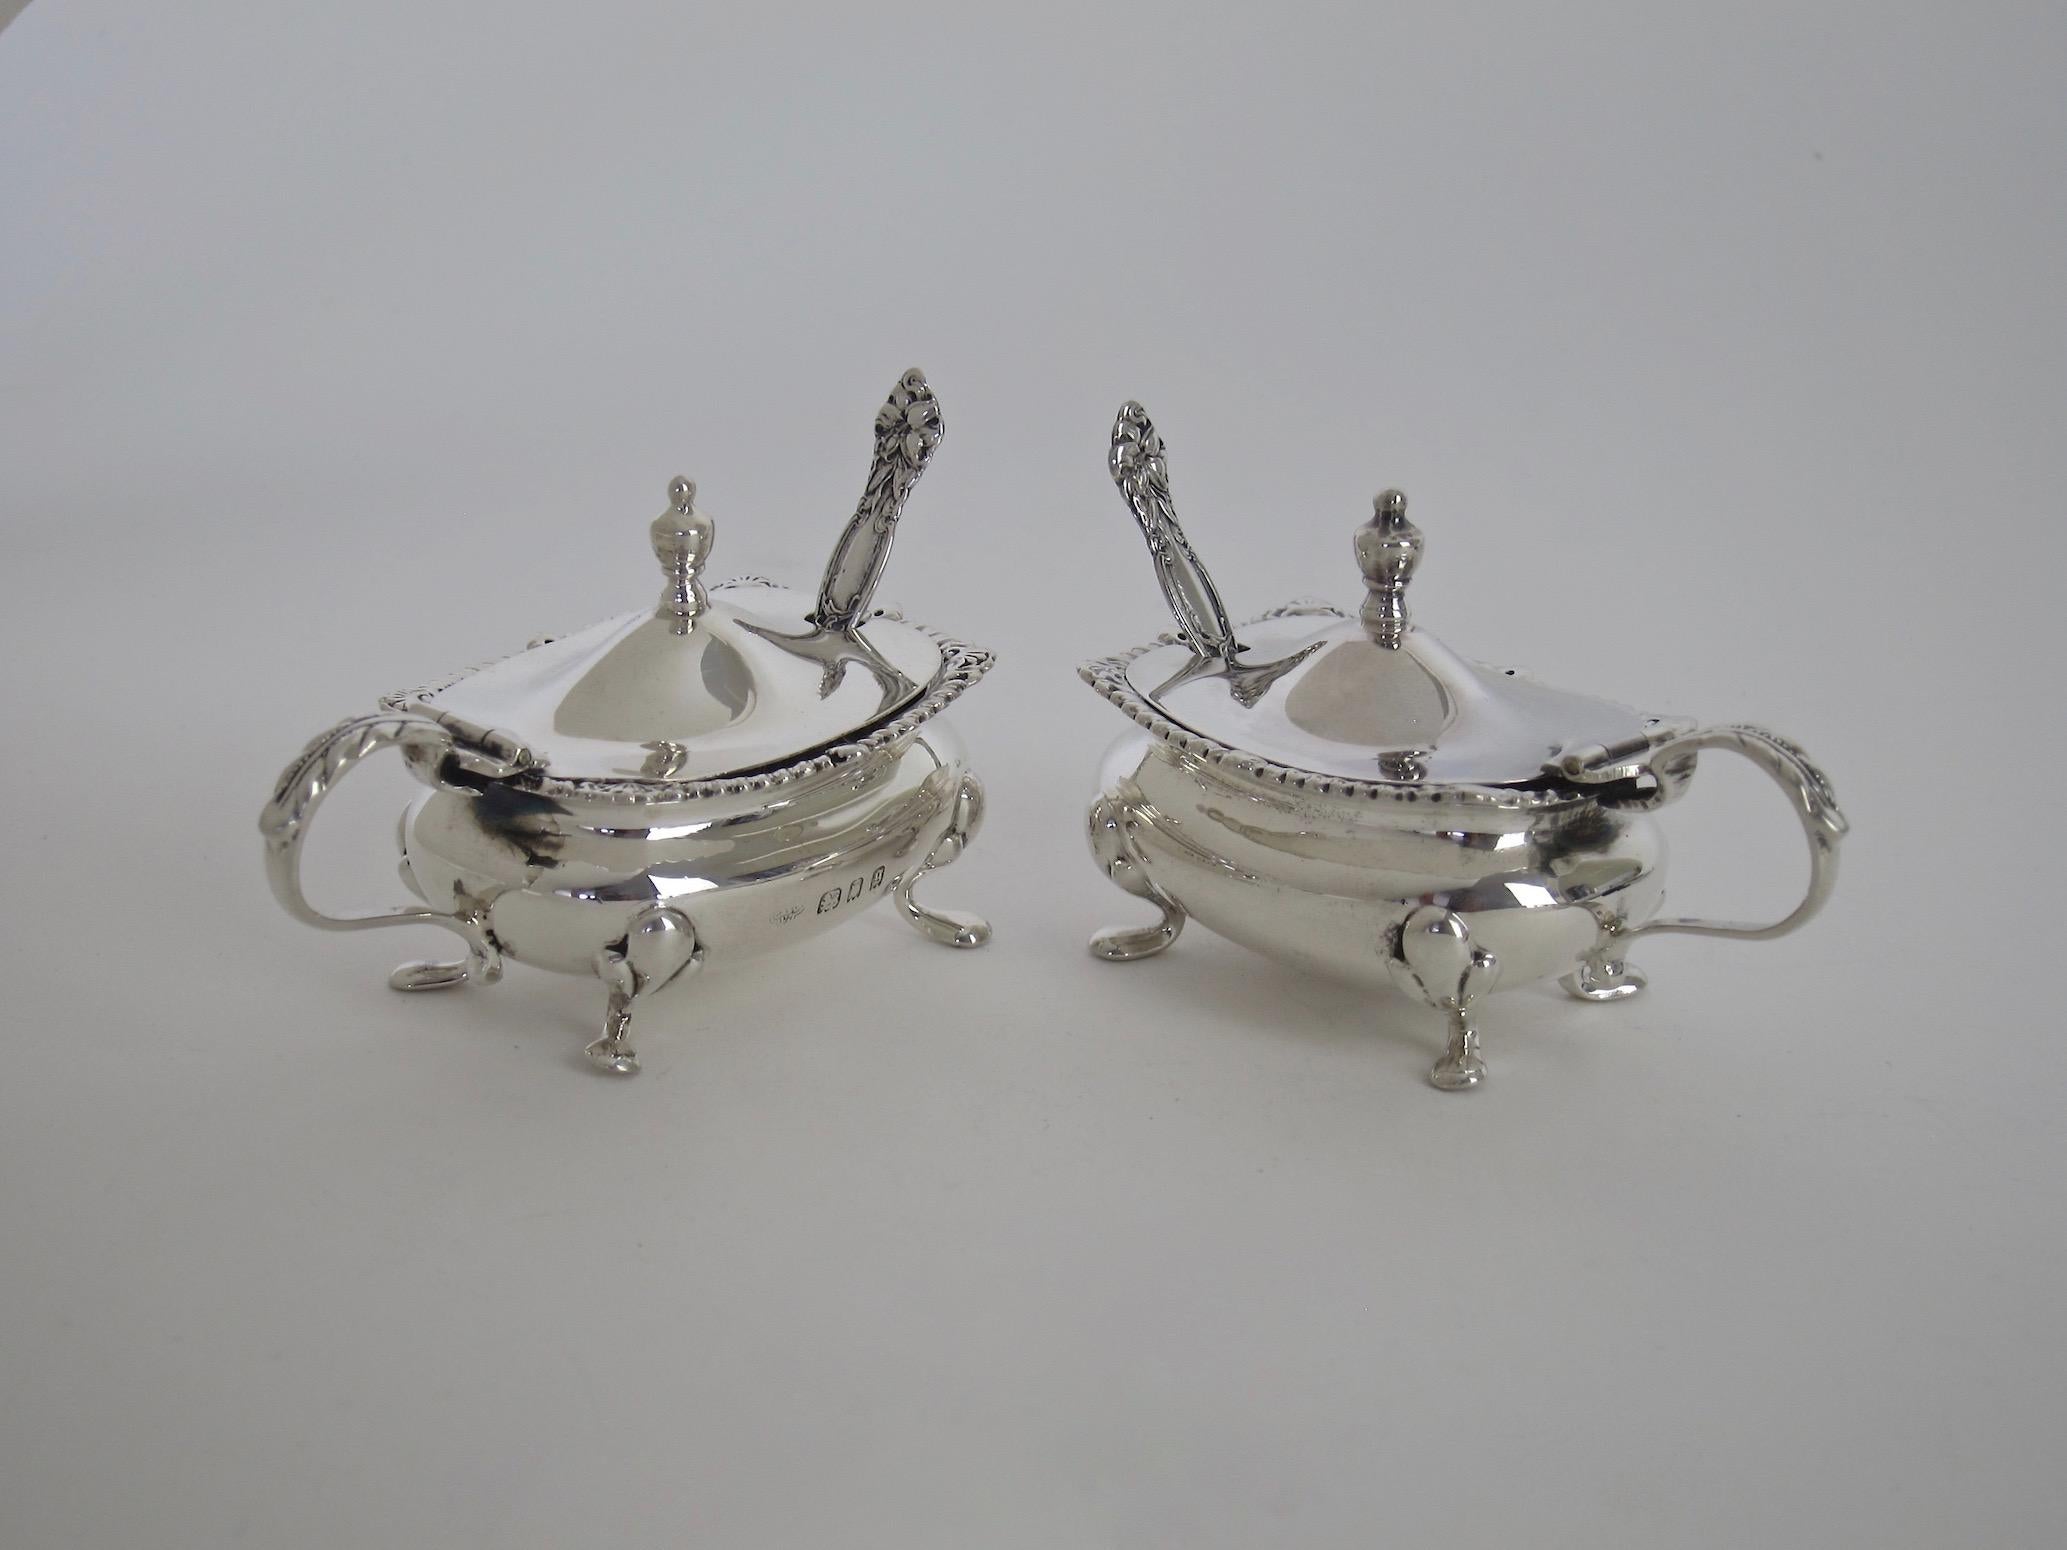 Antique Sterling Silver Mustard Pots from the Goldsmiths & Silversmiths Co Ltd 4